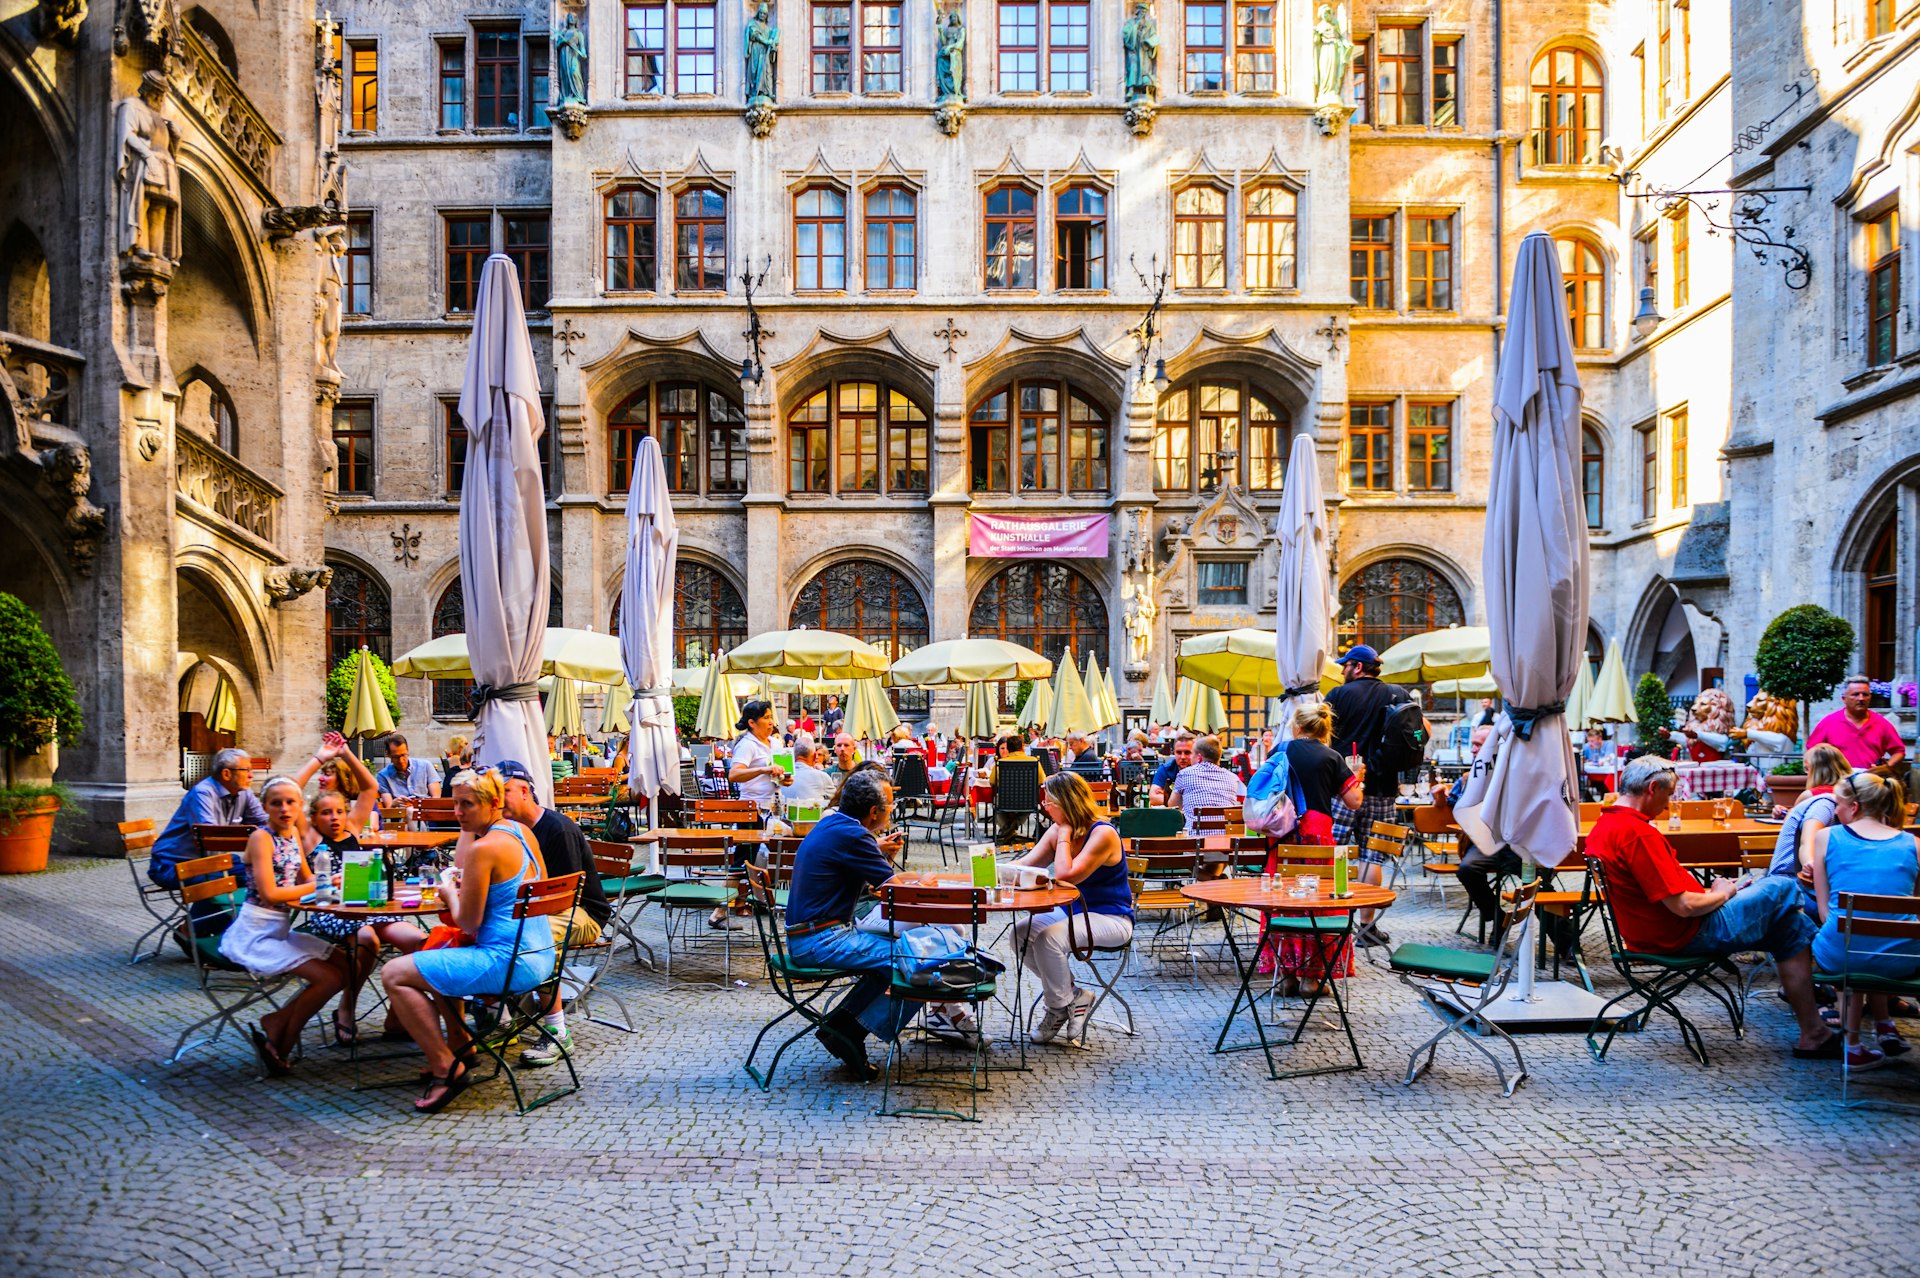 People seated on outdoor tables at Marienplatz in Munich.